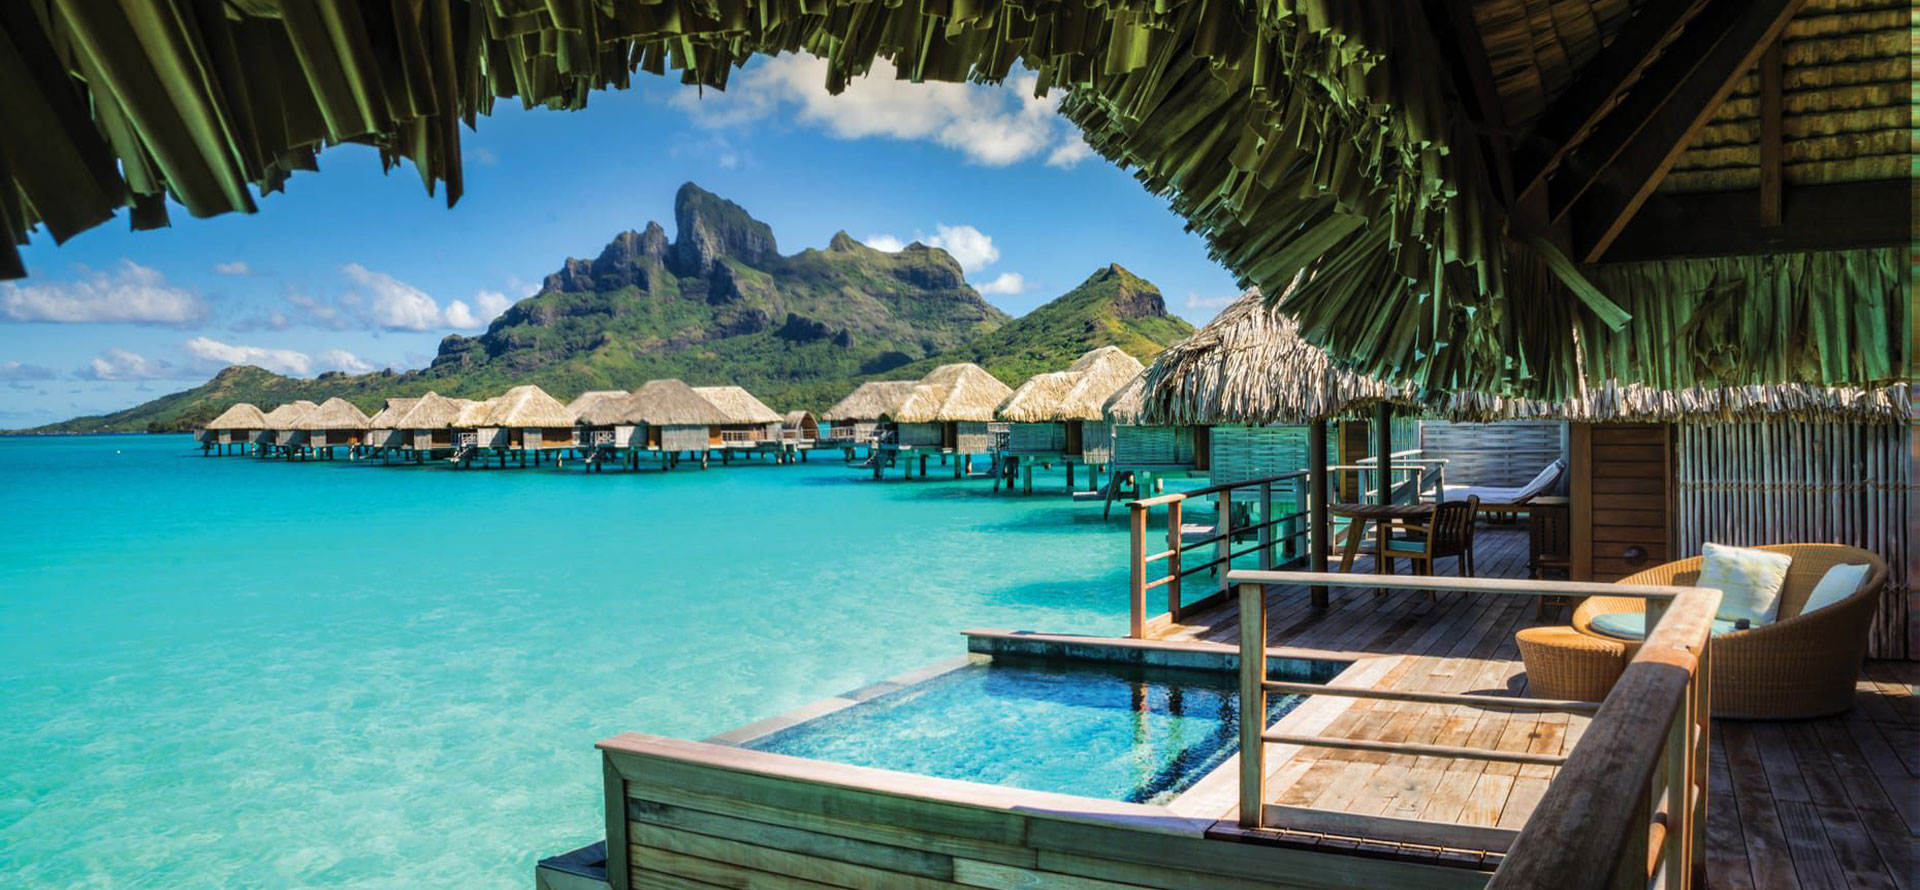 Overwater bungalows in the caribbean with mountain view.